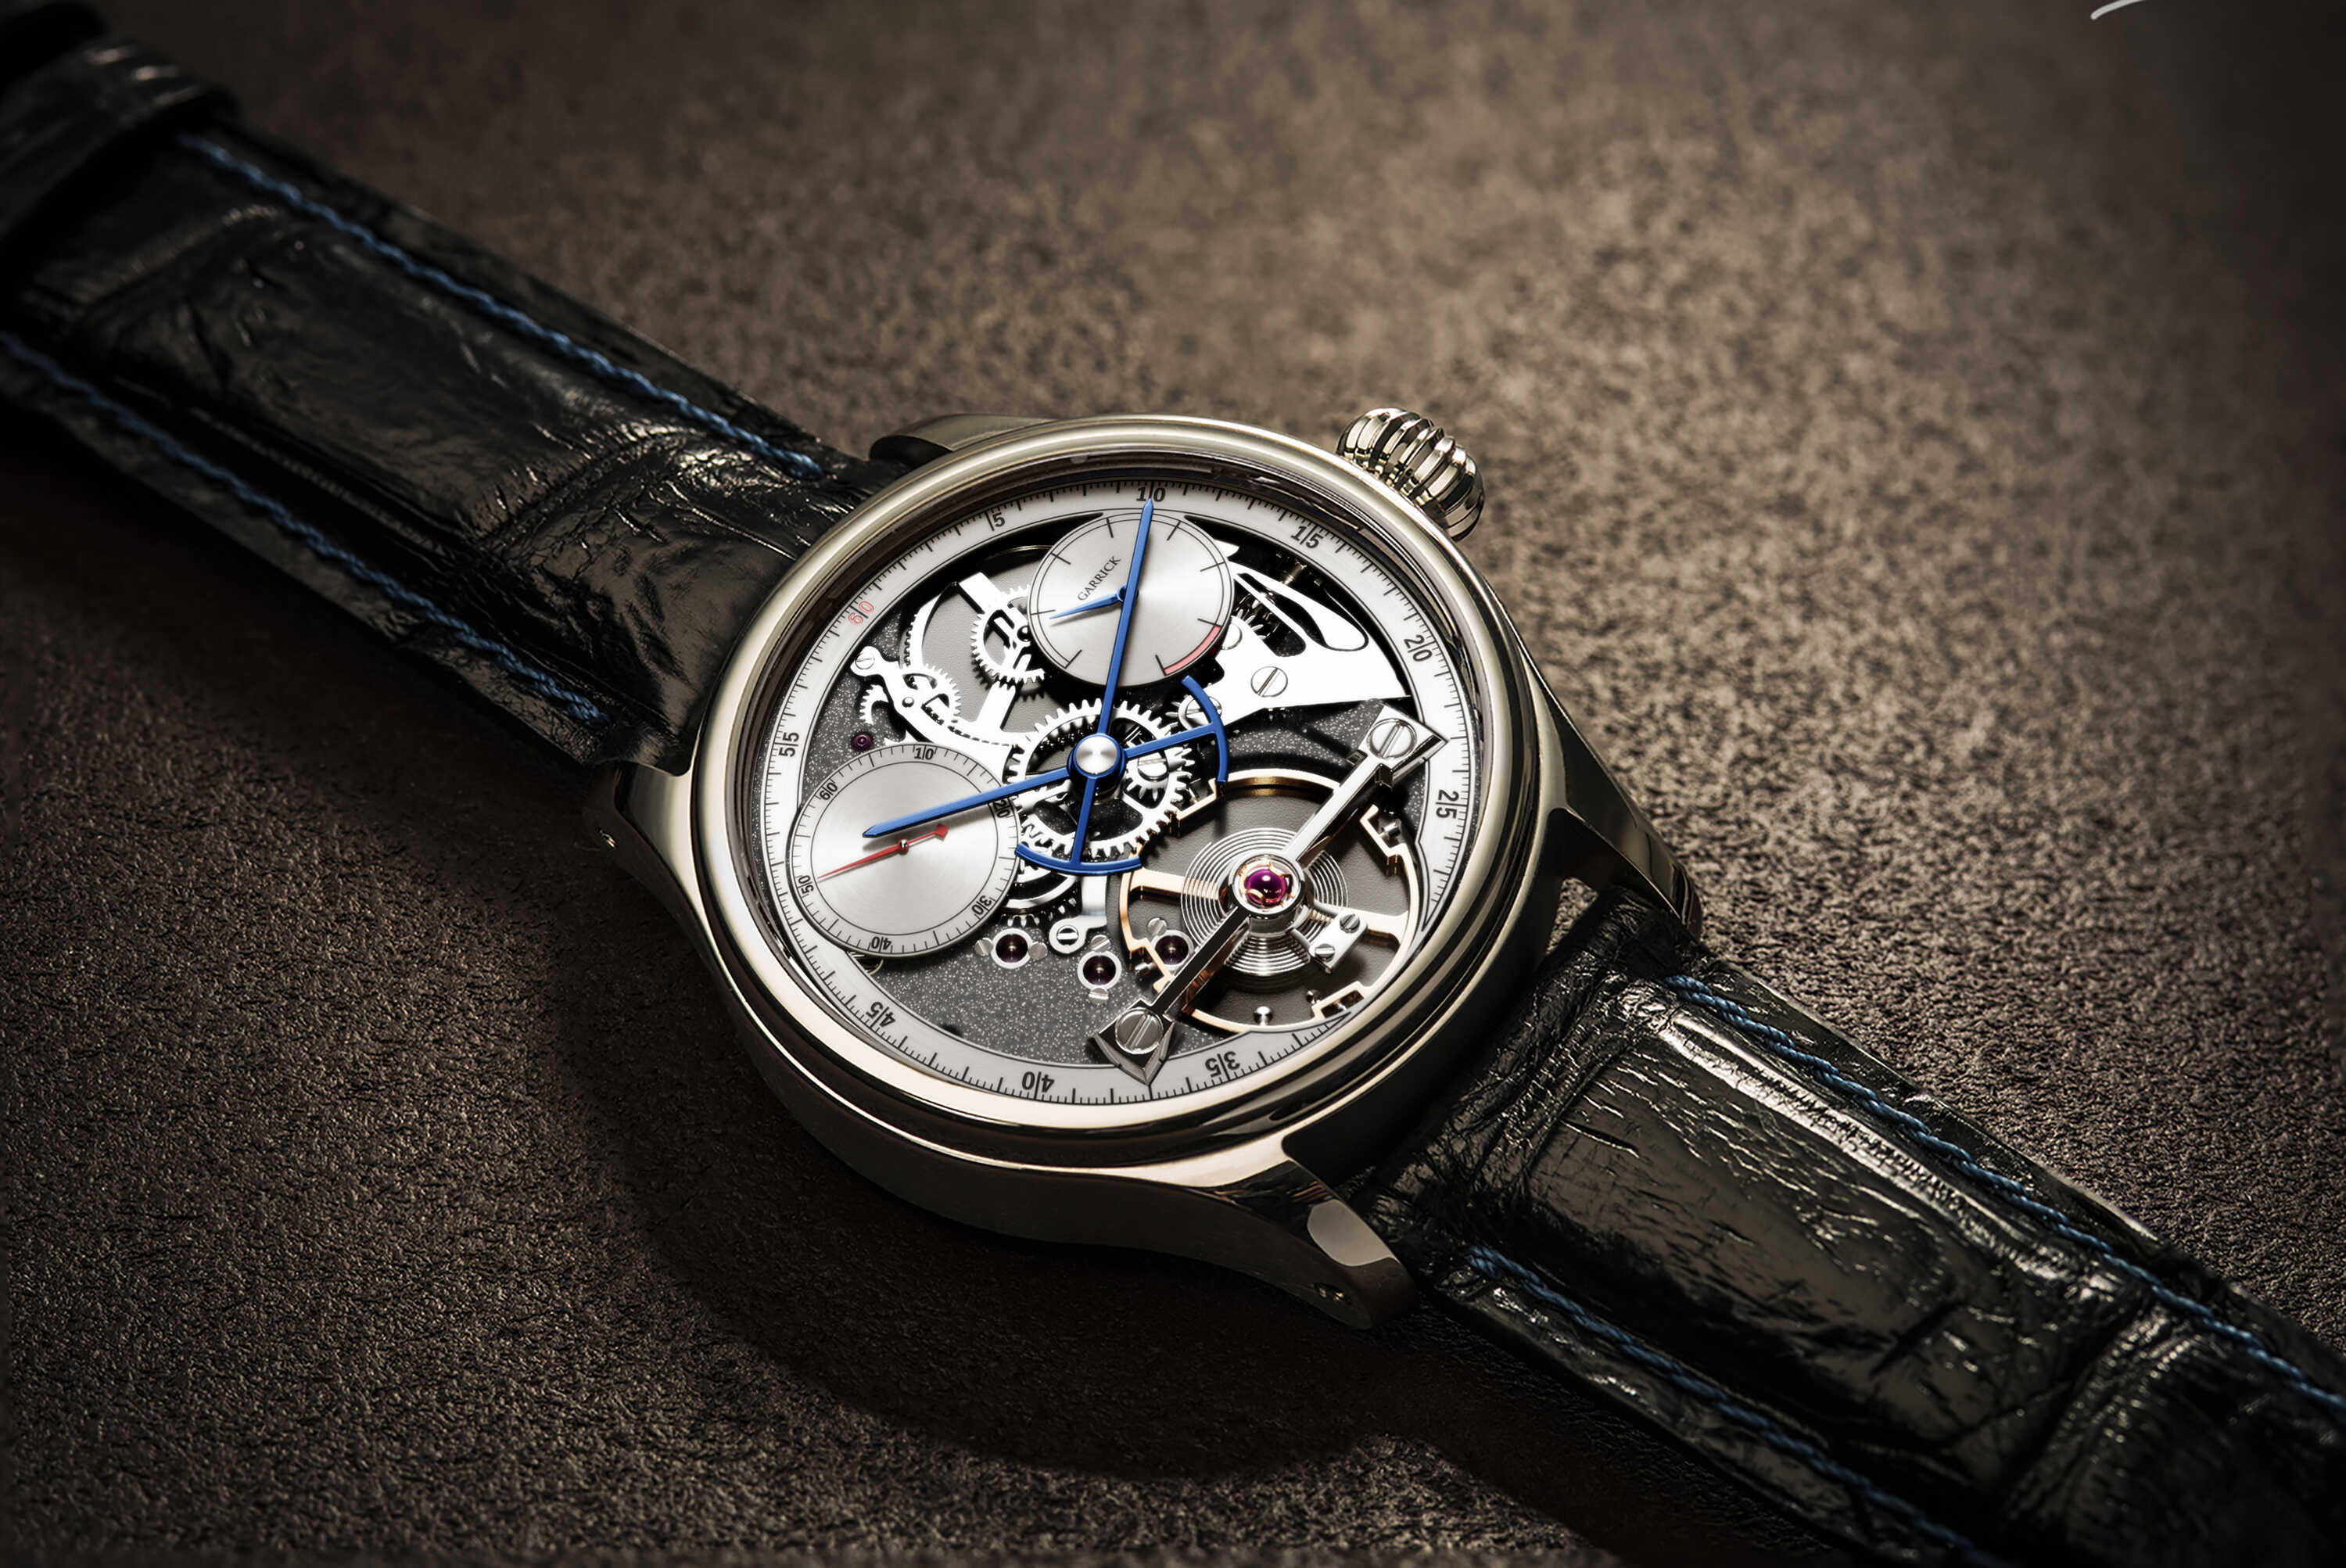 Garrick S3 watch with skeleton dial and in-house watch movement